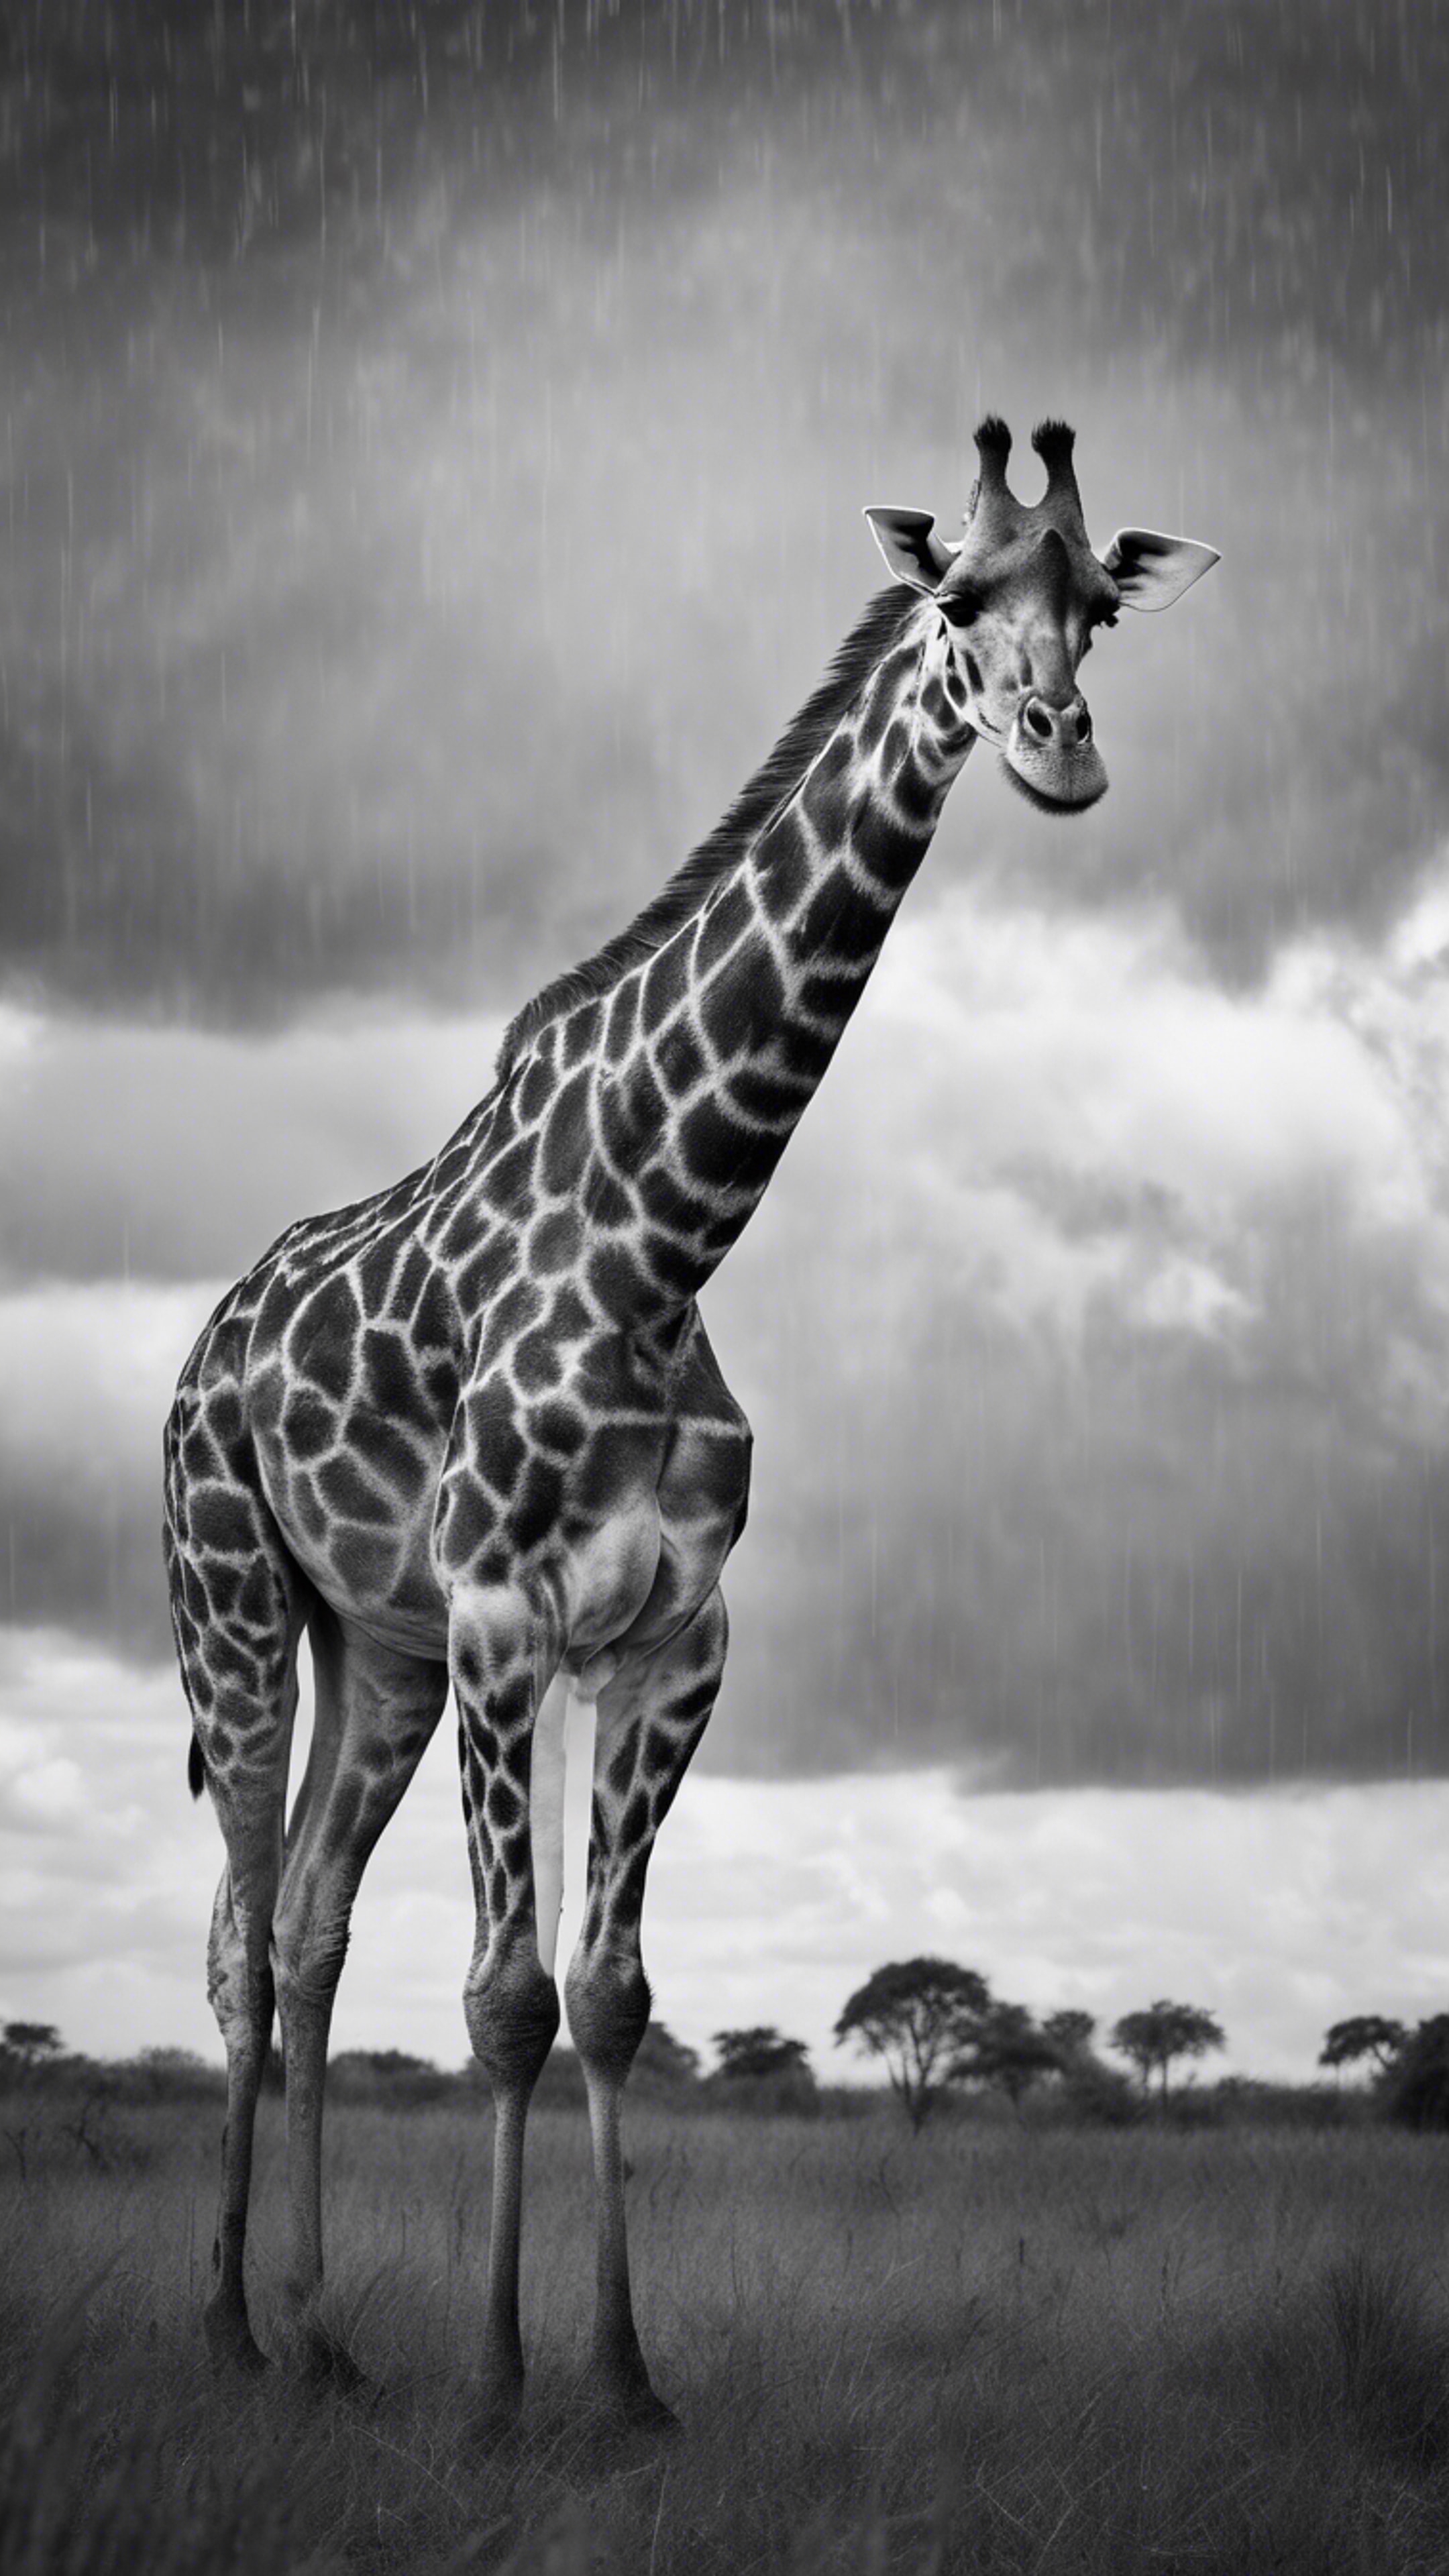 A beautifully photographed black and white image of a giraffe sauntering under rain clouds. Hintergrund[33f5eecce55b4c40952e]